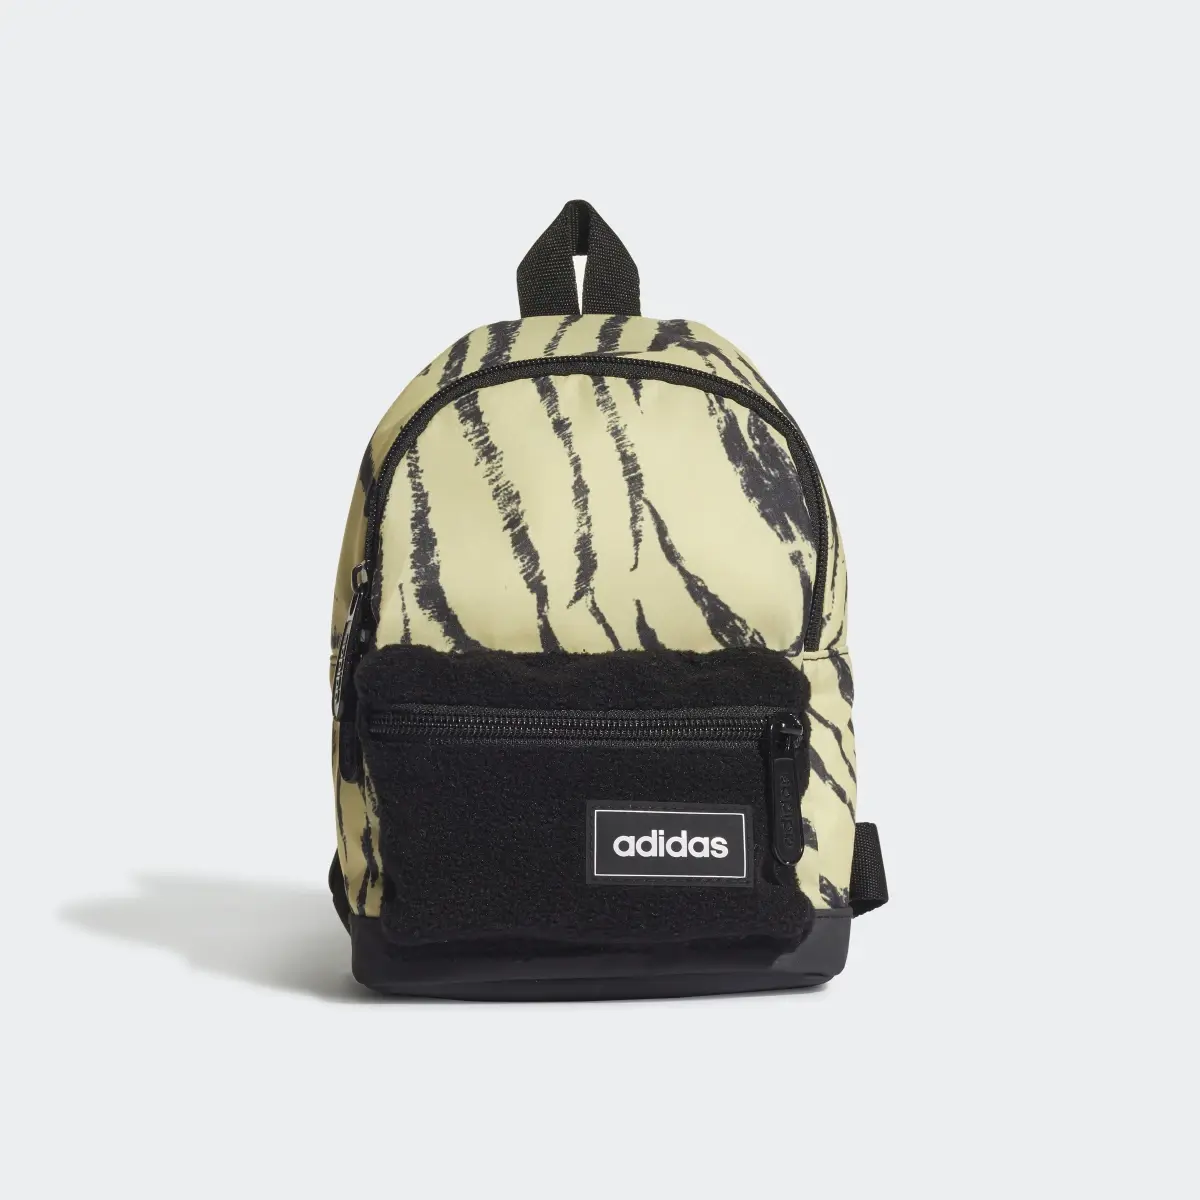 Adidas Tailored for Her Sport to Street Training Mini Rucksack. 2